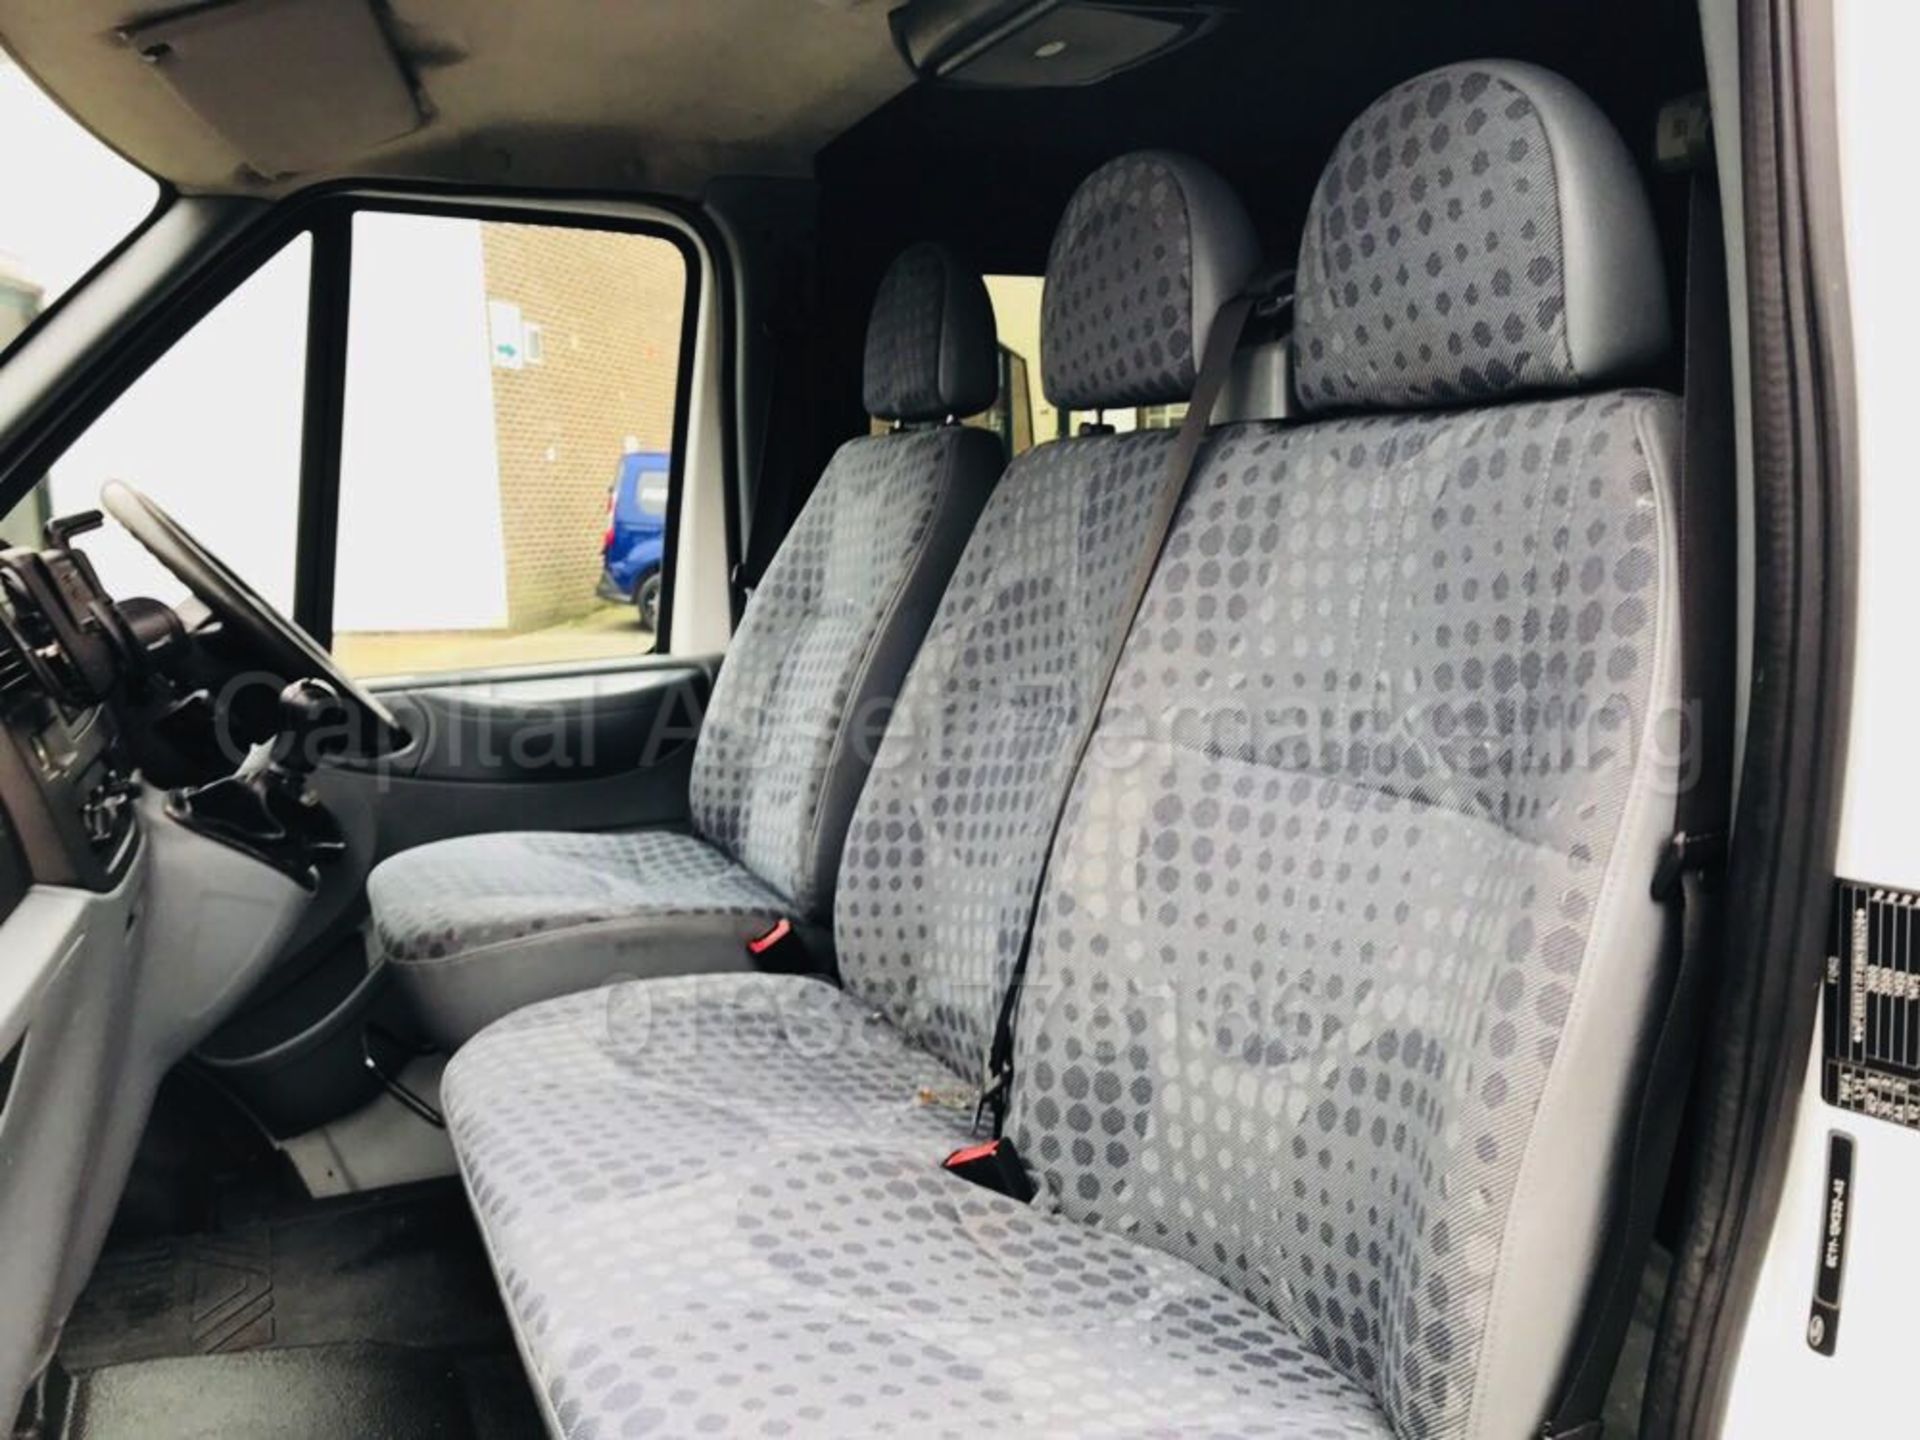 FORD TRANSIT 85 T260 SWB *SPORTY* (2010 MODEL) '2.2 TDCI - 85 PS - 5 SPEED' (NO VAT - SAVE 20%) - Image 12 of 22